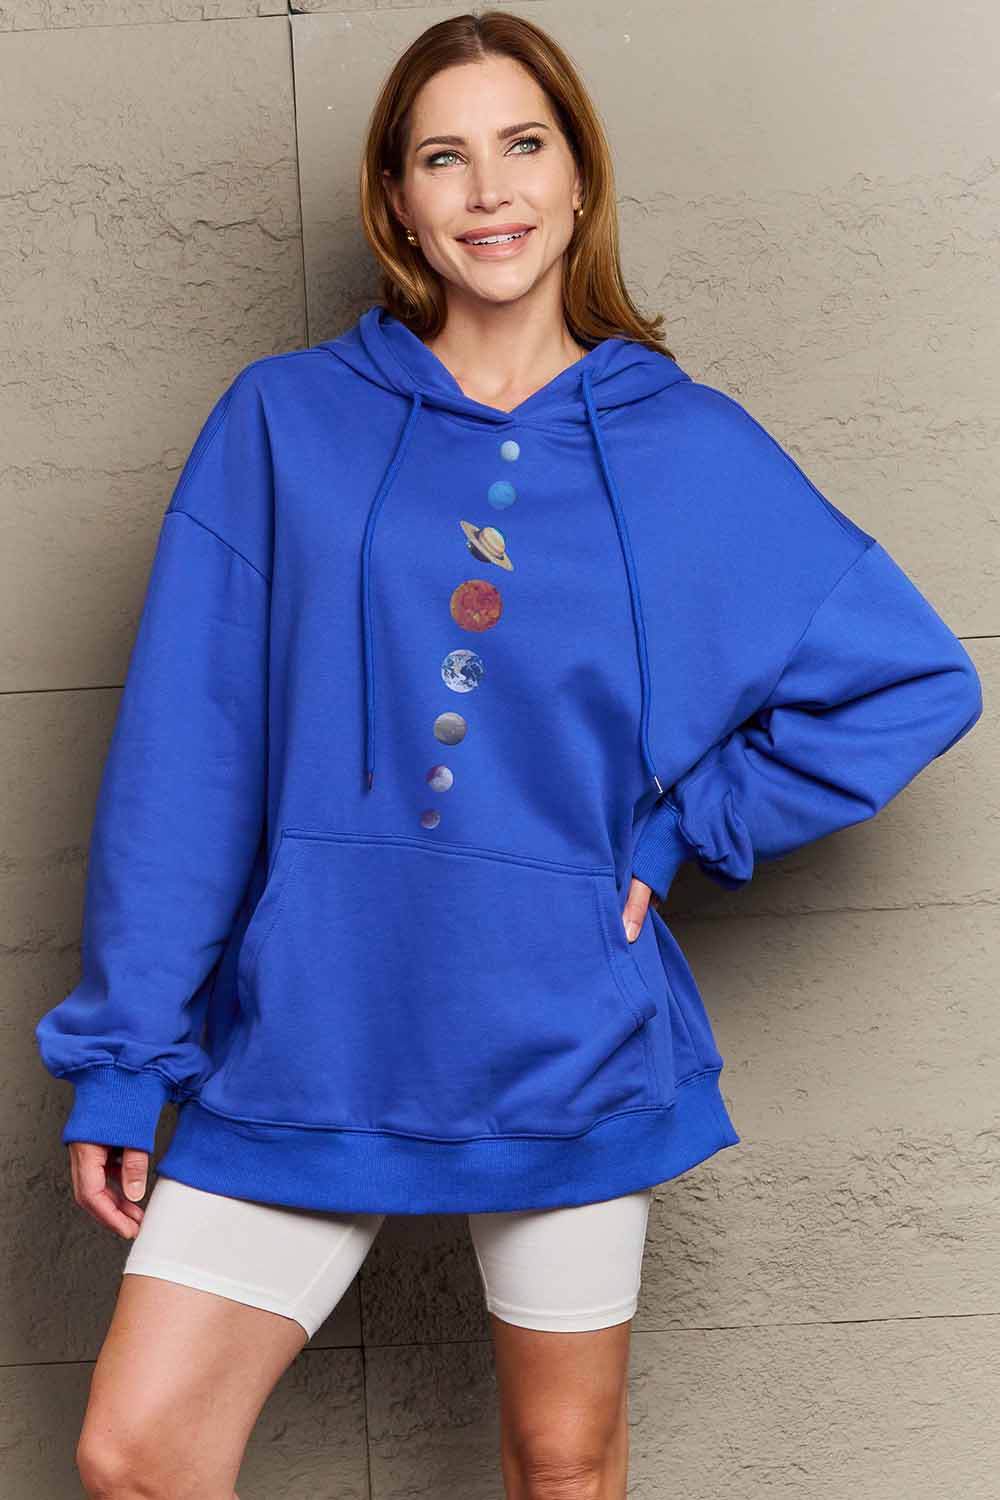 Simply Love Simply Love Full Size Dropped Shoulder Solar System Graphic Hoodie